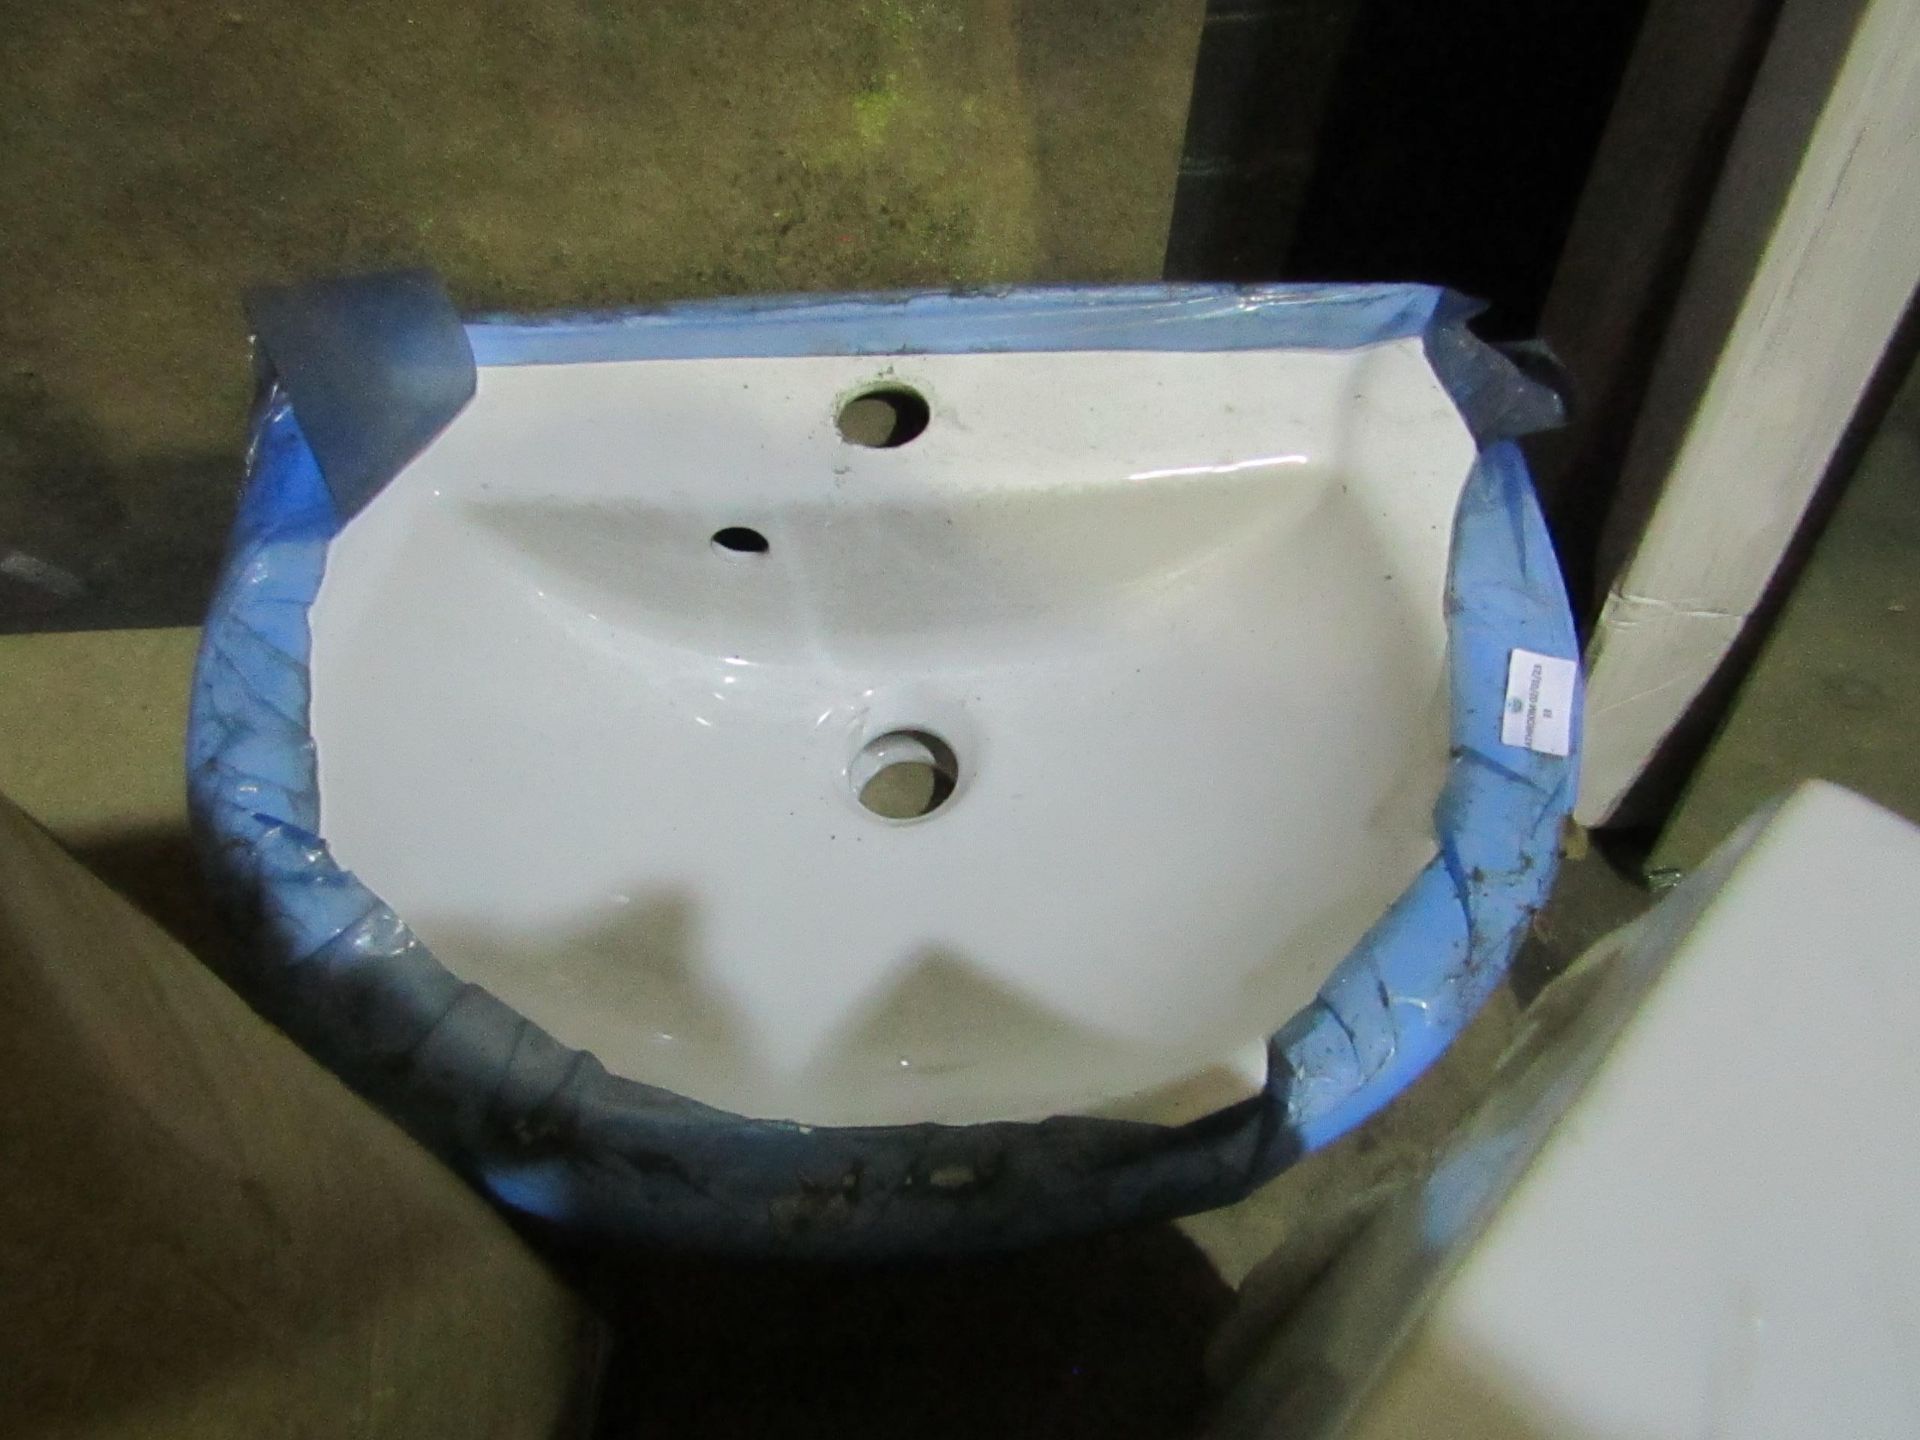 Gala - Countertop White Basin 450mm - May Need a Clean due to storage, No Packaging.